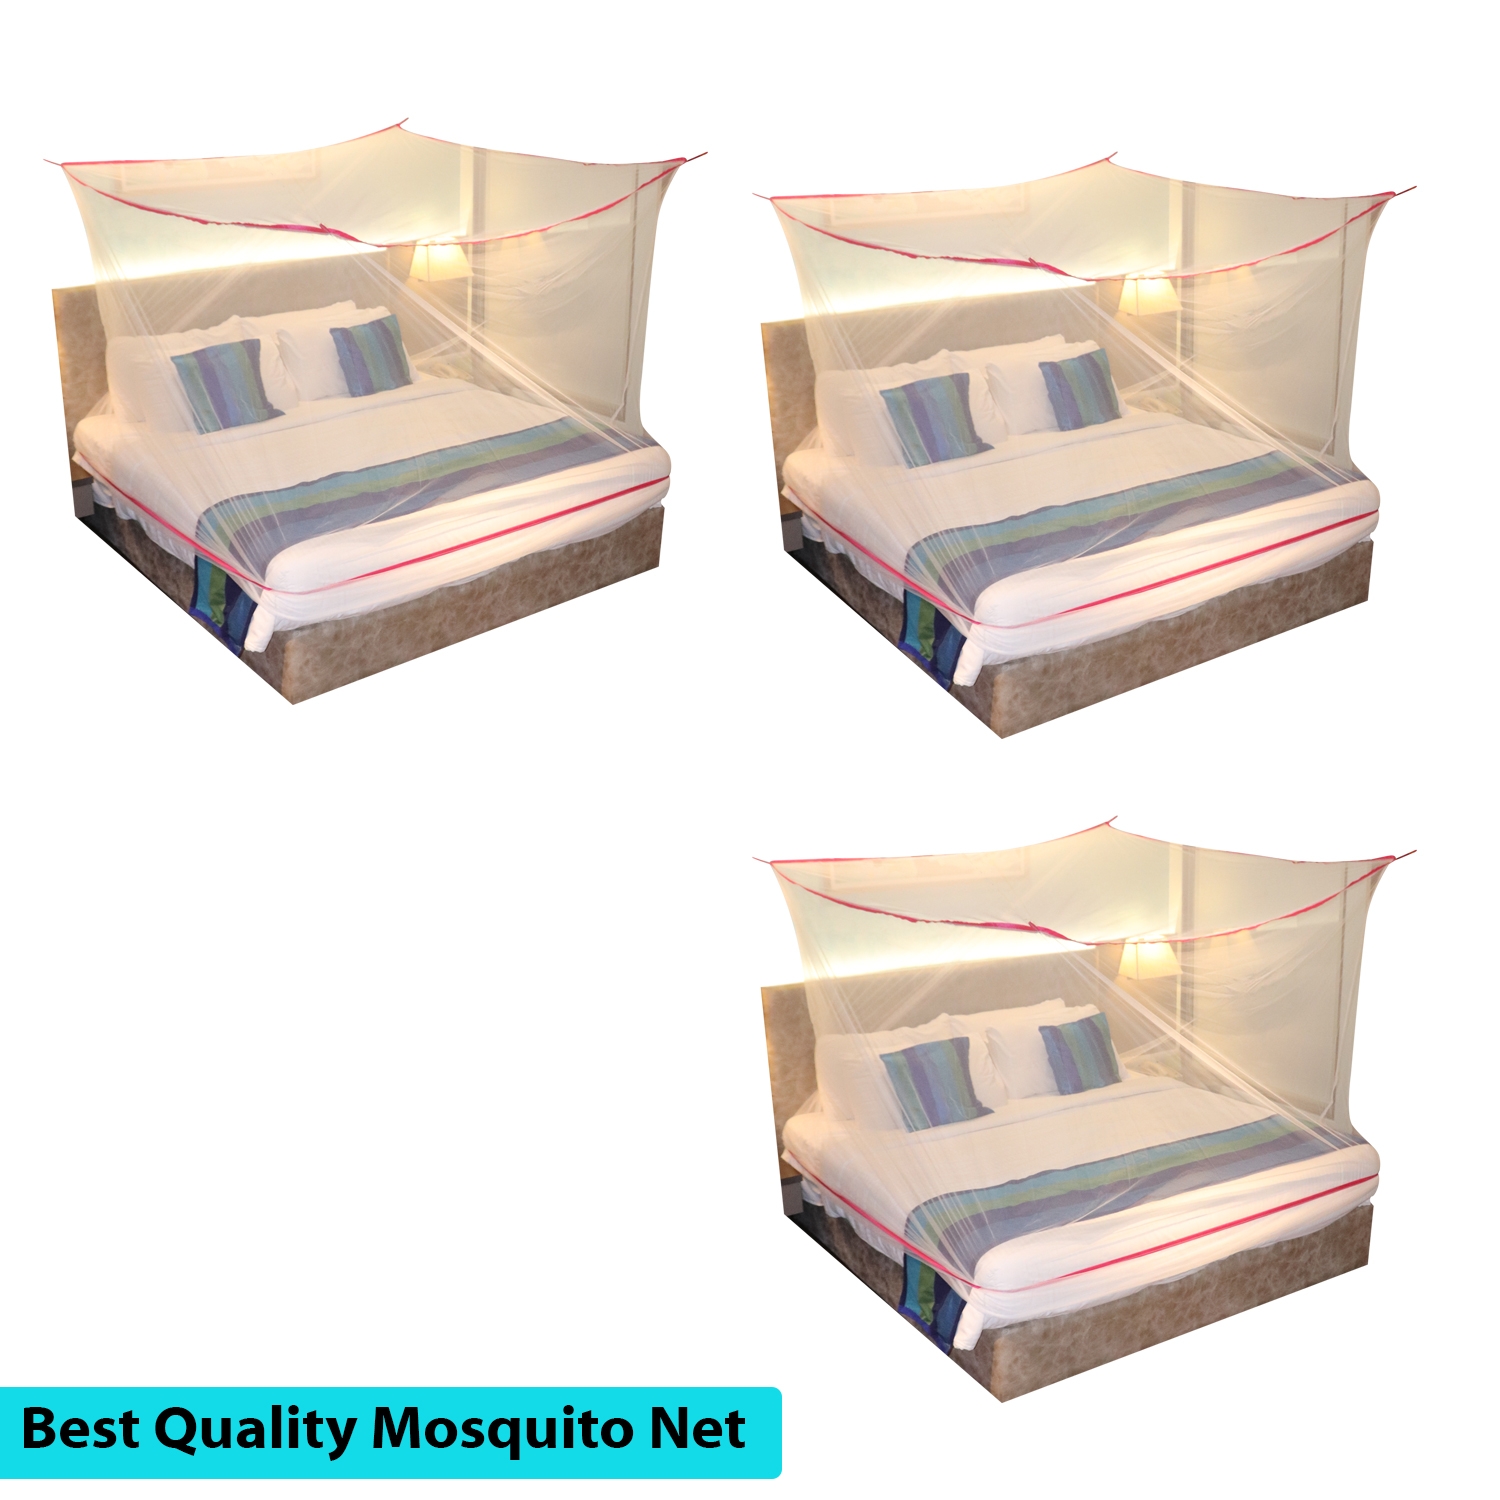 Paola Jewels | Mosquito Net for Double Bed, King-Size, Square Hanging Foldable Polyester Net White And PinkPack of 3